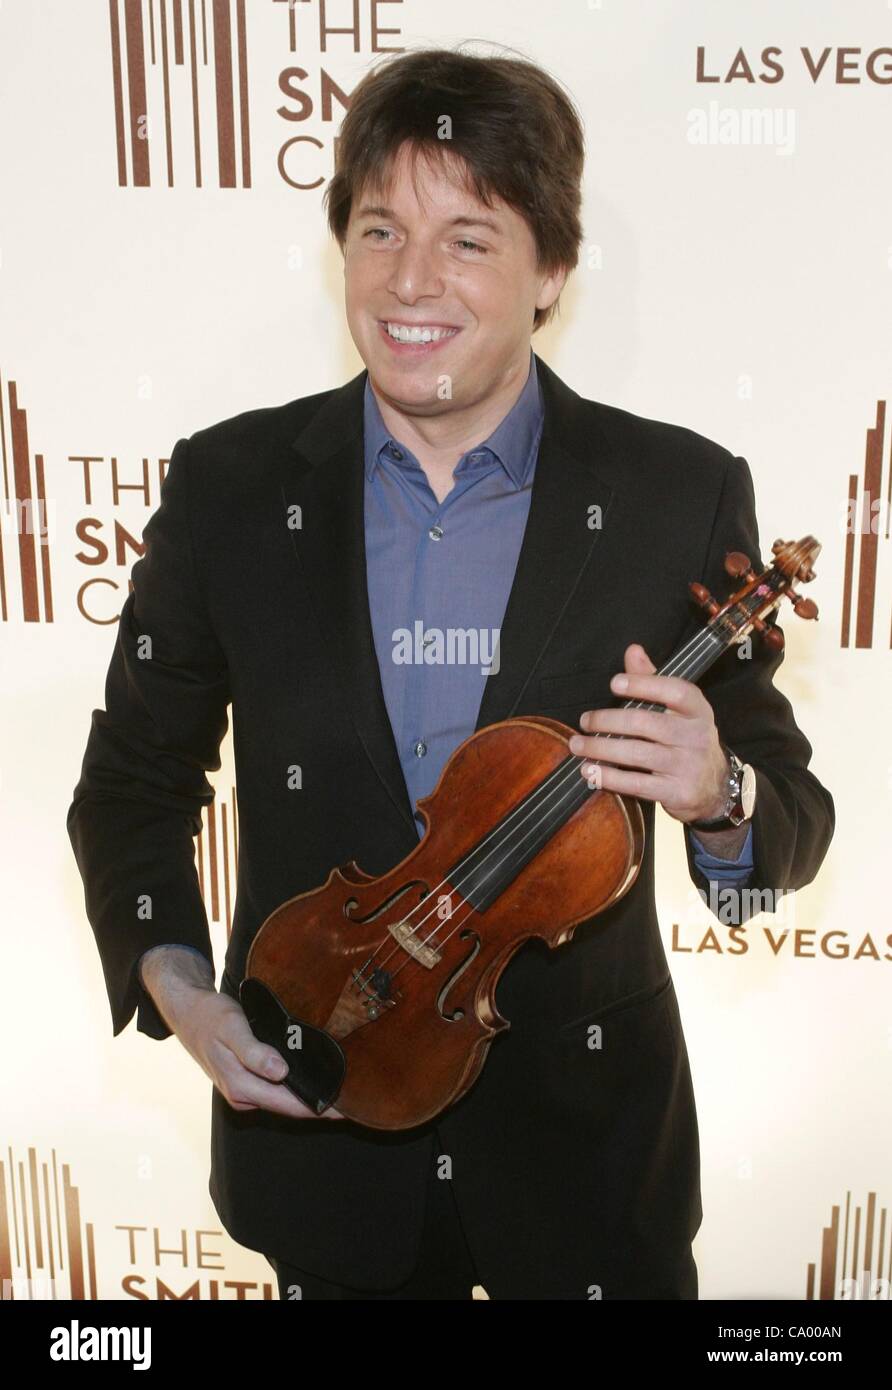 Joshua Bell at arrivals for Opening Night at the Smith Center for the Performing Arts, 361 Symphony Park Ave, Las Vegas, NV March 10, 2012. Photo By: James Atoa/Everett Collection Stock Photo